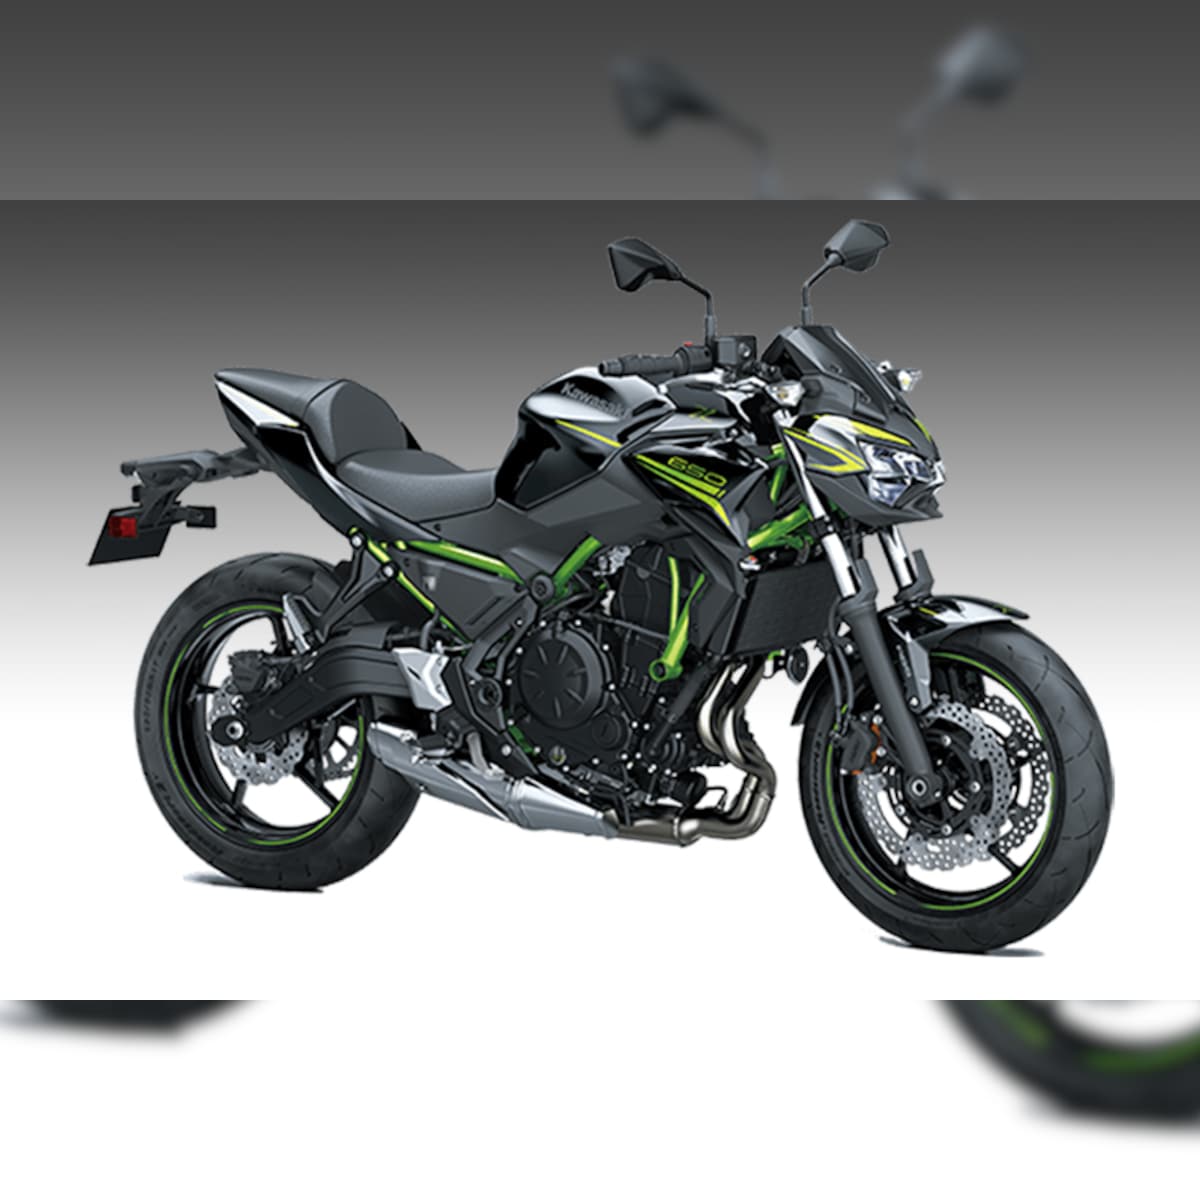 sne hvid voldsom Blind tillid 2020 Kawasaki Z650 BS-VI Launched in India at Rs 5.94 Lakh